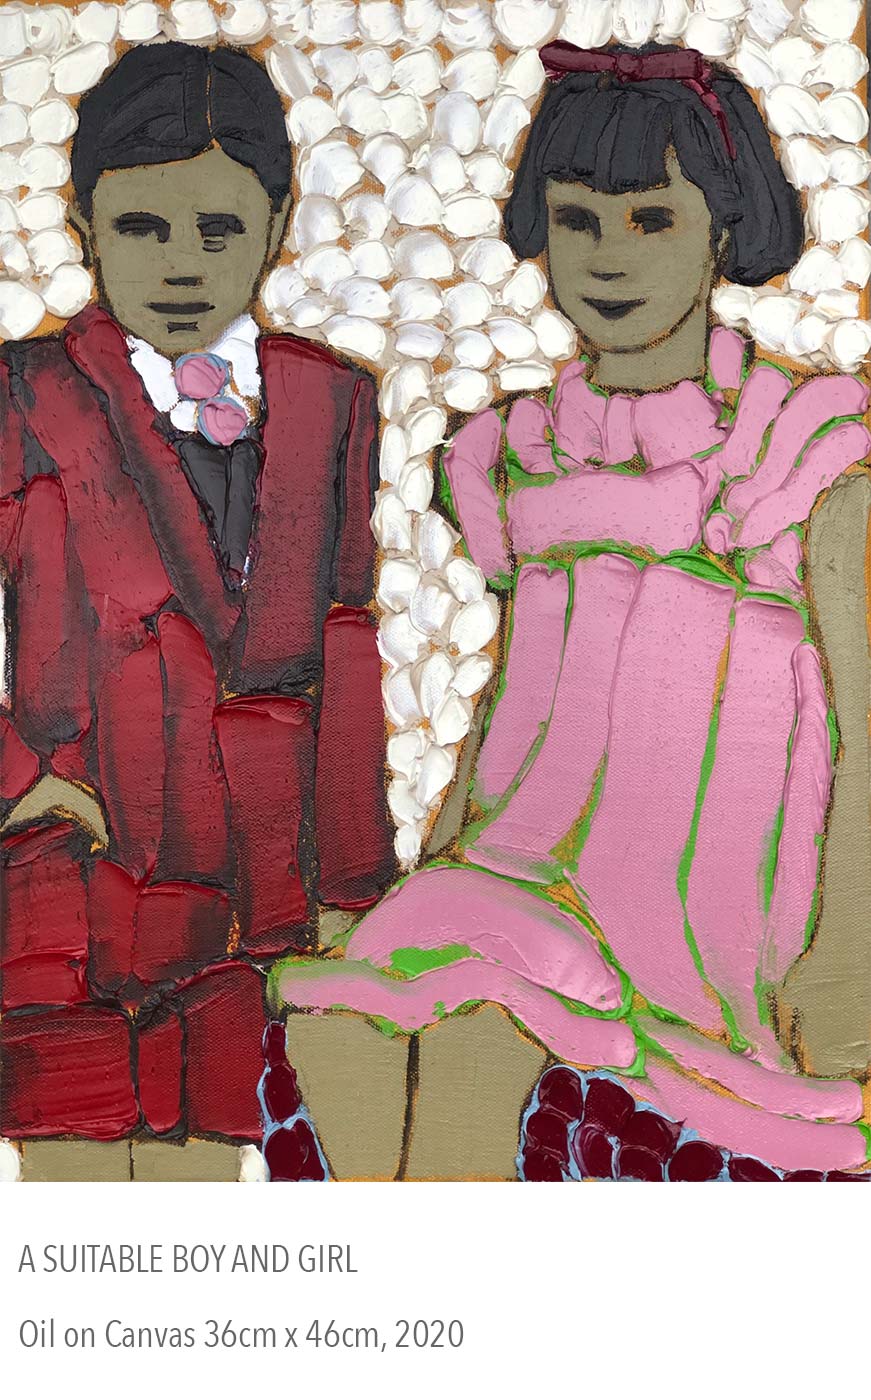 2020 oil painting called A Suitable Boy and Girl